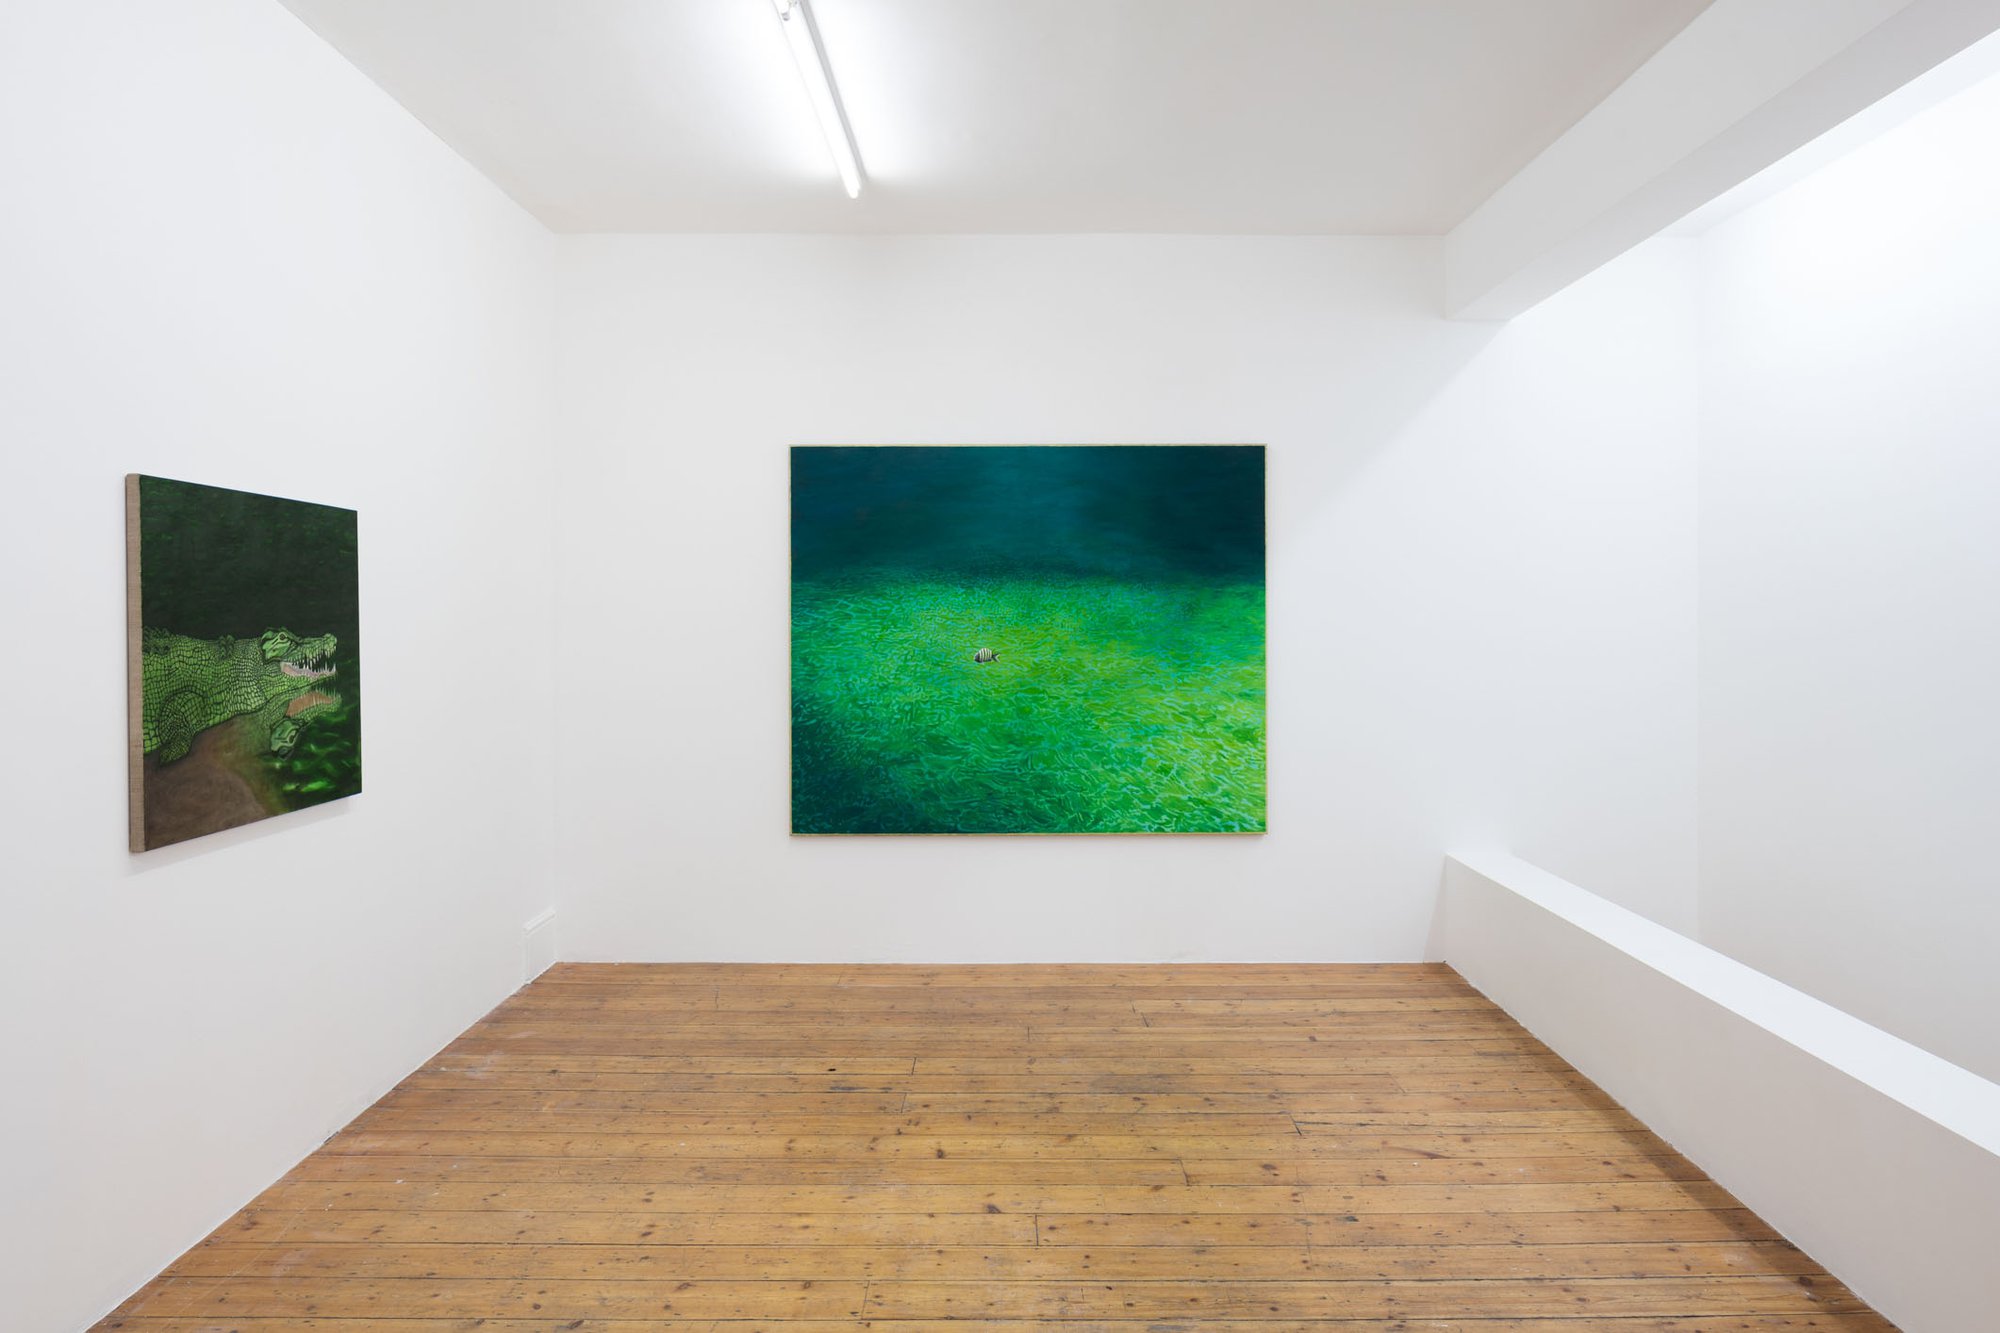 Installation view, Leidy Churchman, Lost Horizons, Rodeo, London, 2016